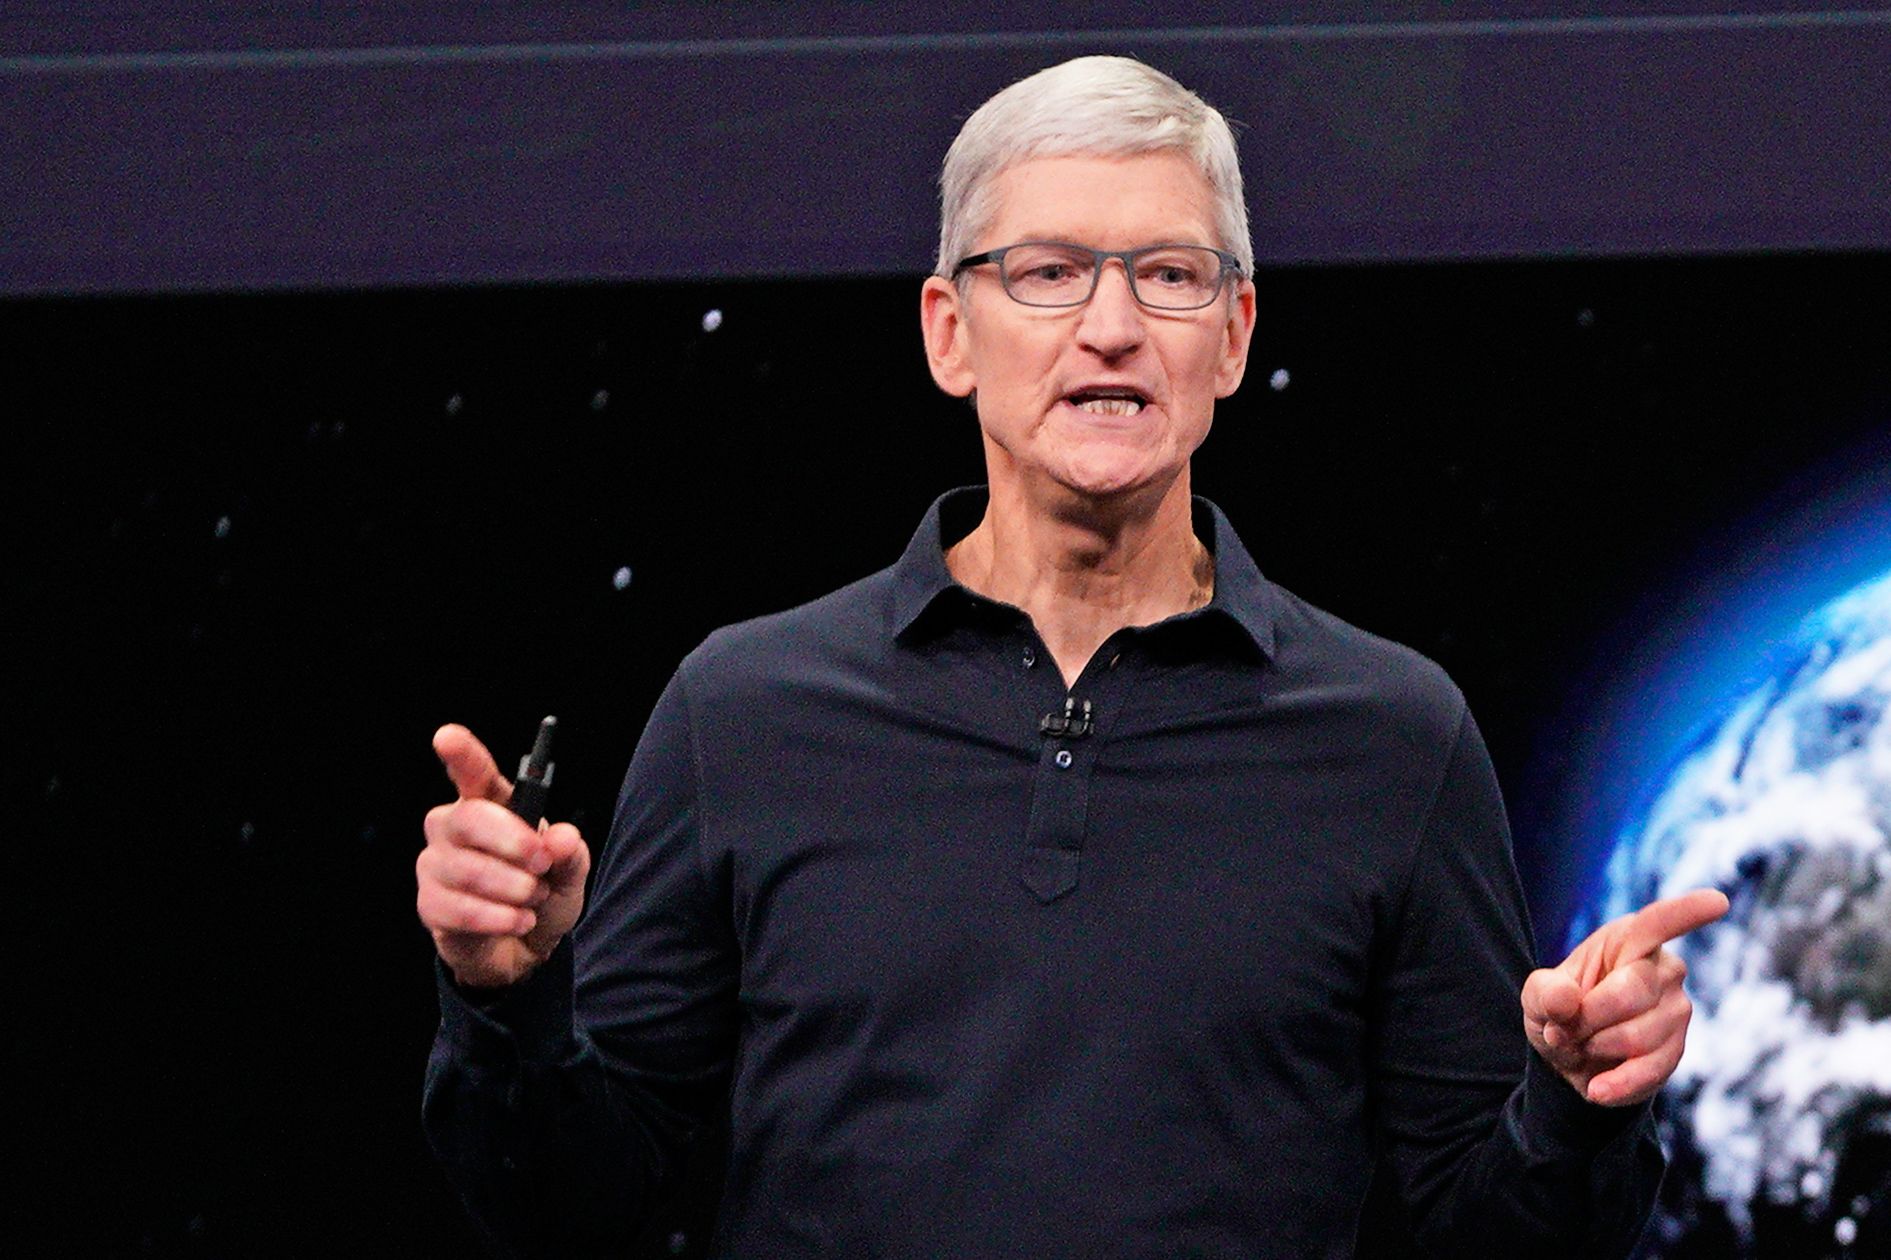 Apple took swipes at Google and Facebook at WWDC